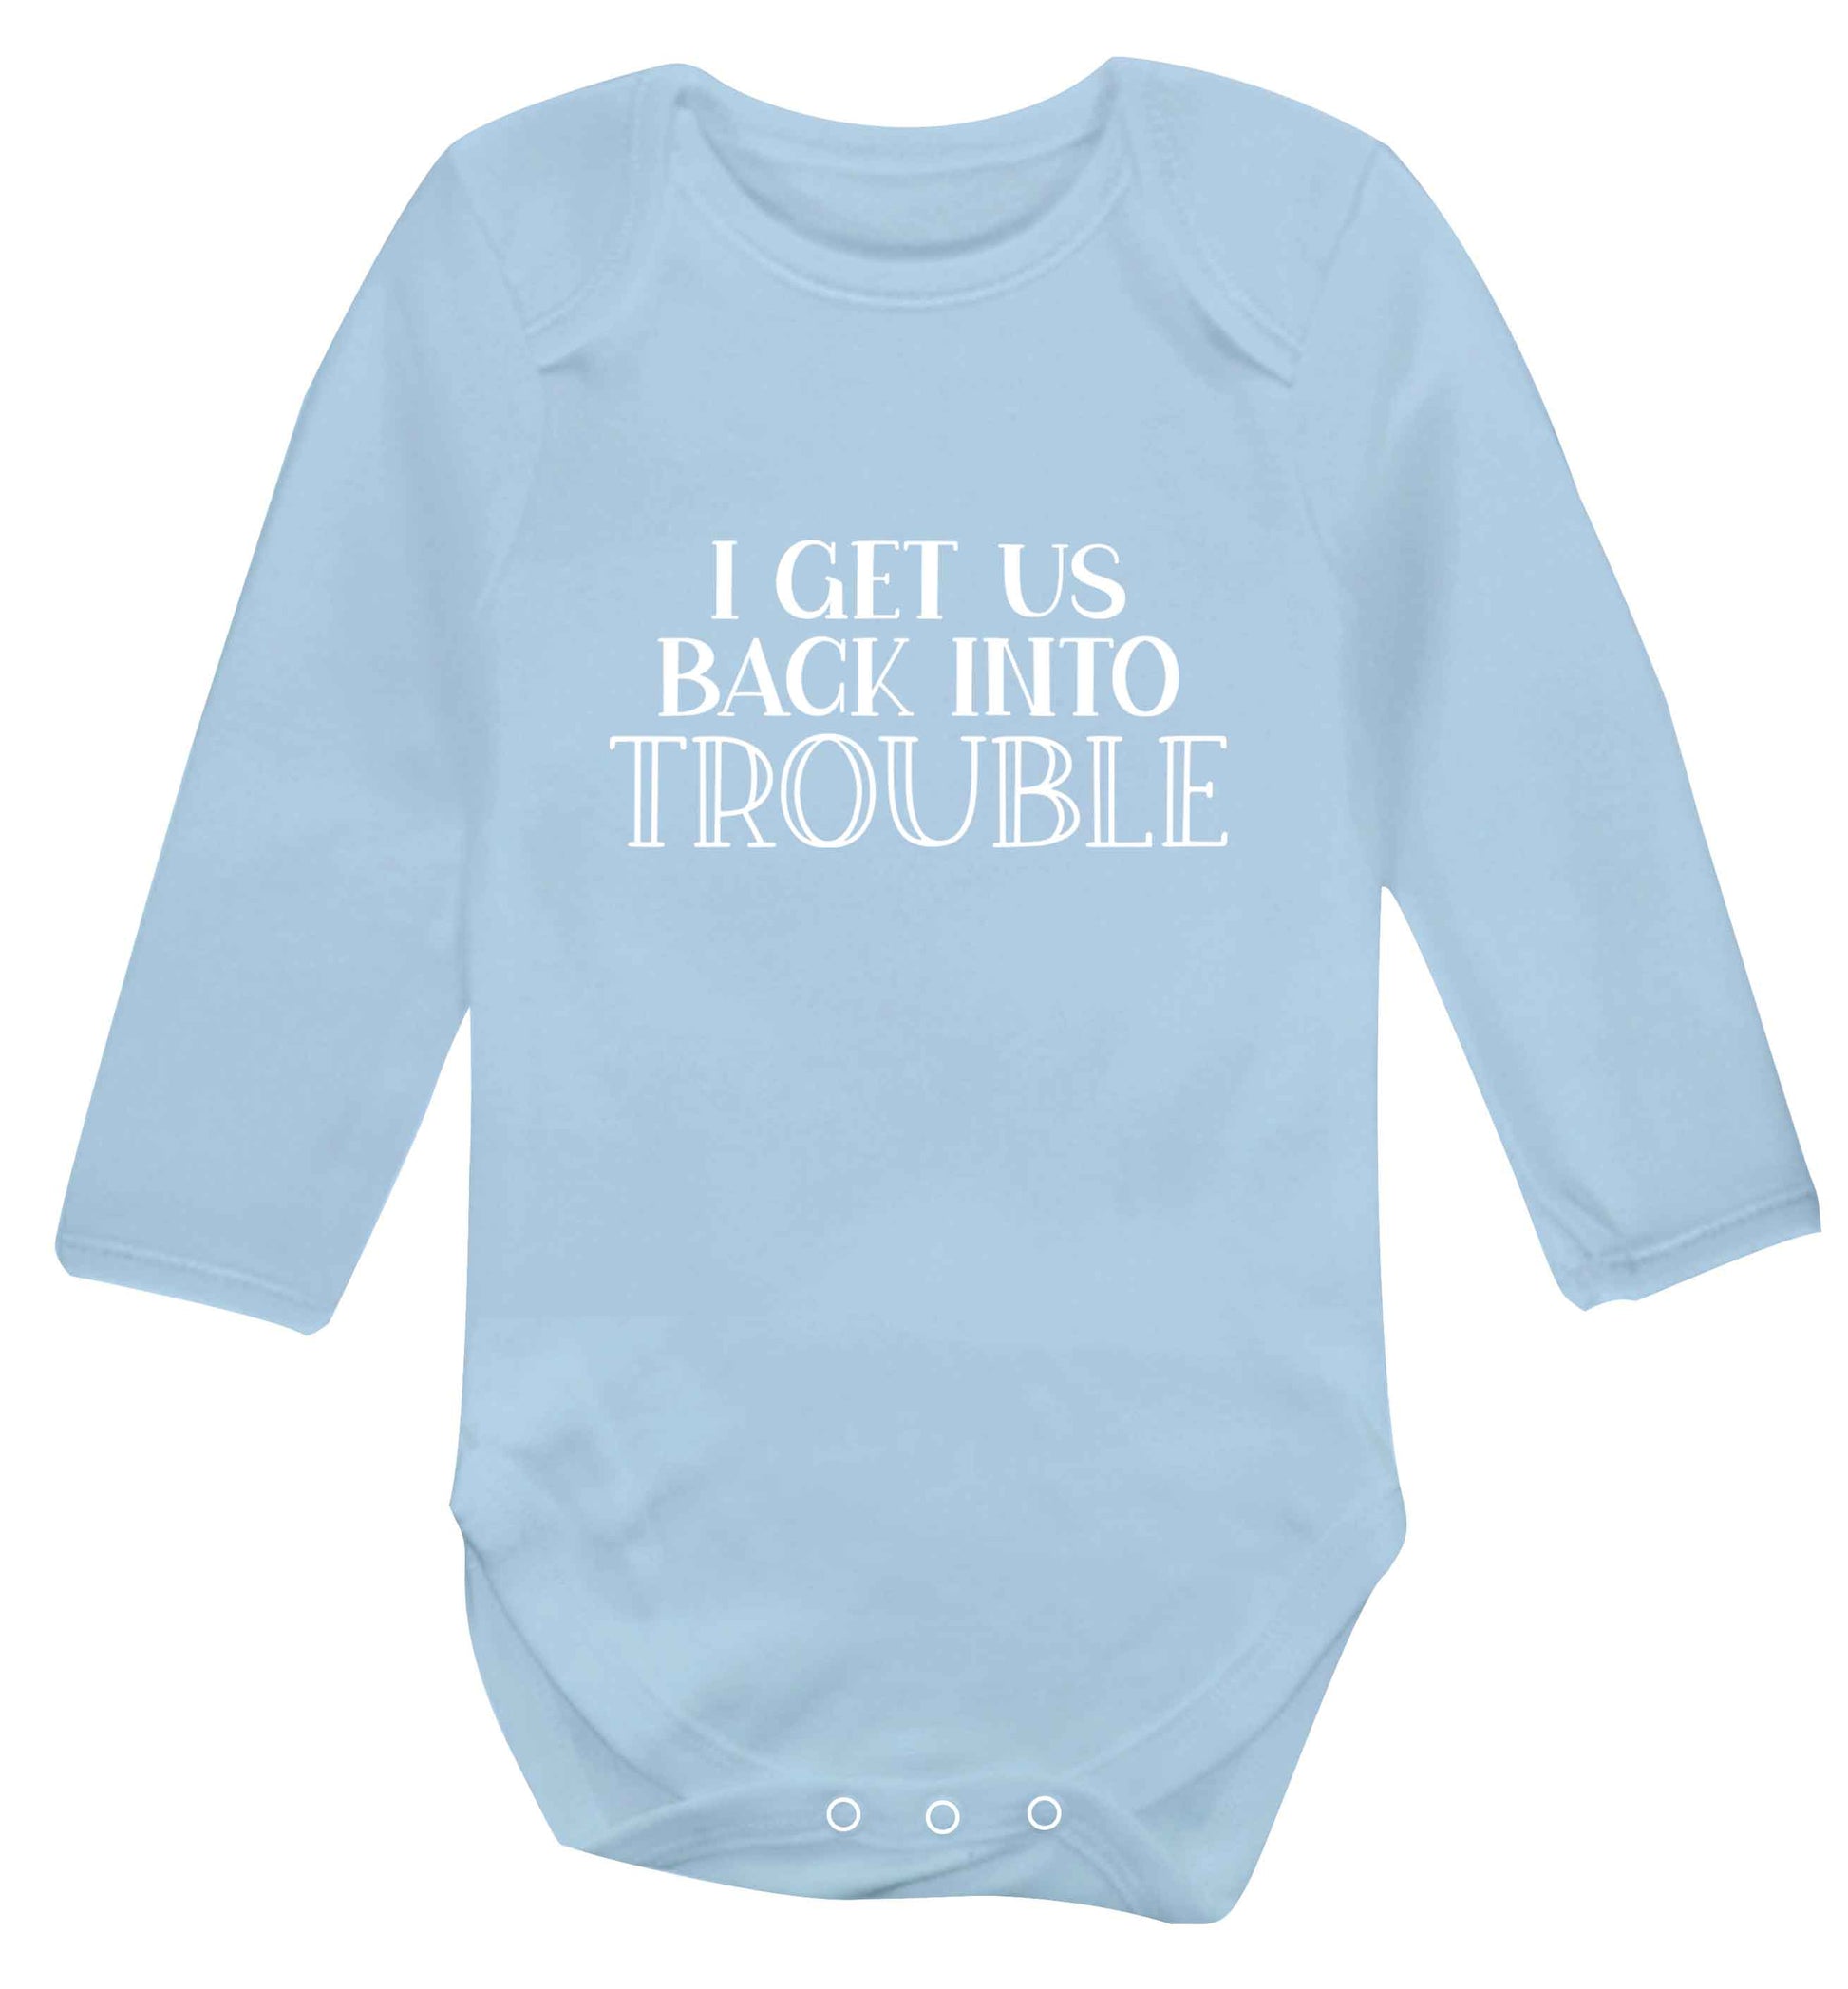 I get us back into trouble baby vest long sleeved pale blue 6-12 months